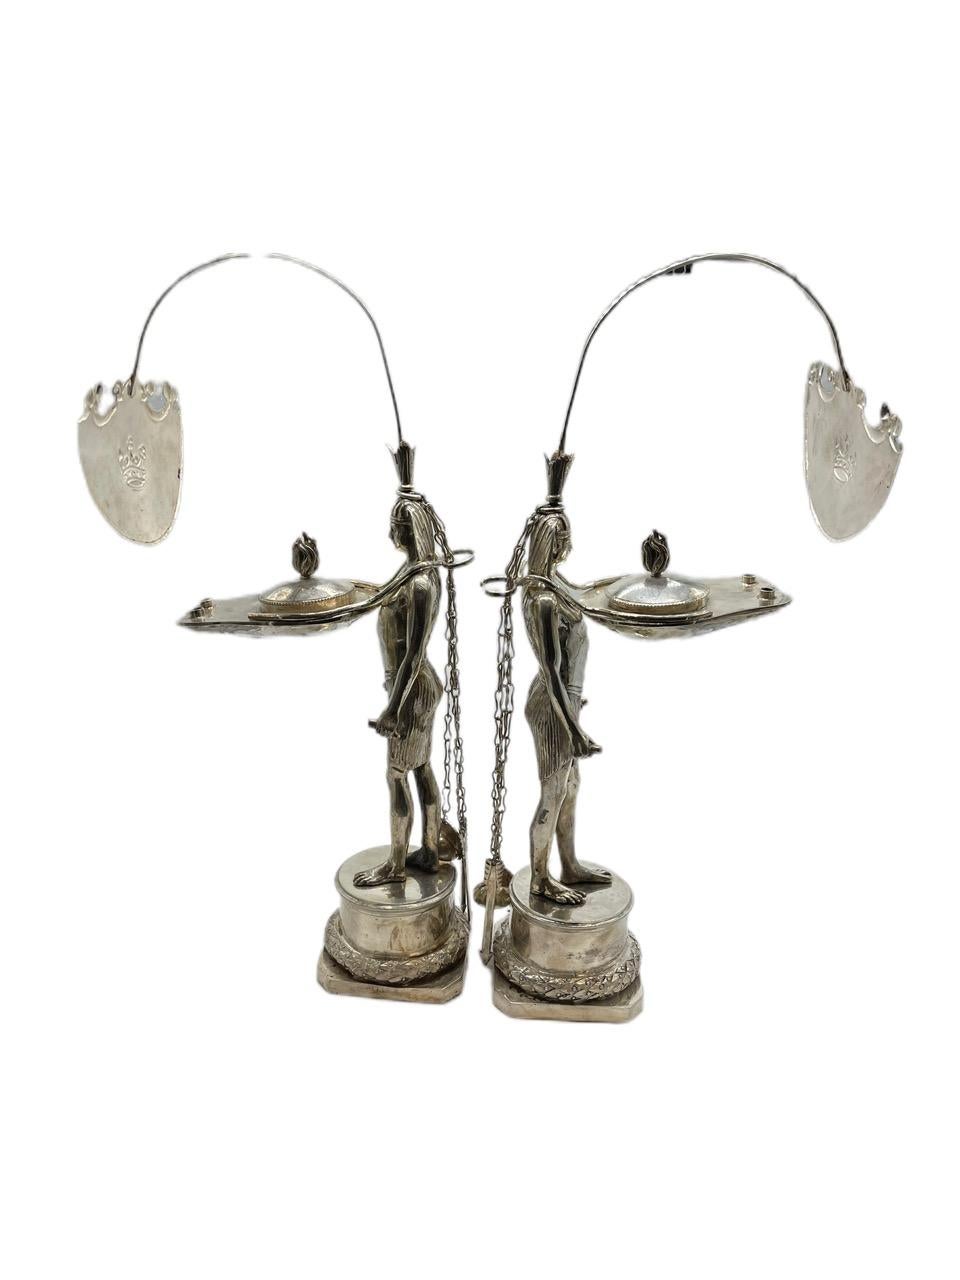 A pair of early 19th century (1828 – 1859) Italian Antique silver oil lamps (Lucerne) by Vincenzo Belli II. They are in the “Retour d’Egypte Style”. This production of silver oil lamps was restricted to Italy, mostly being produced in Rome and the